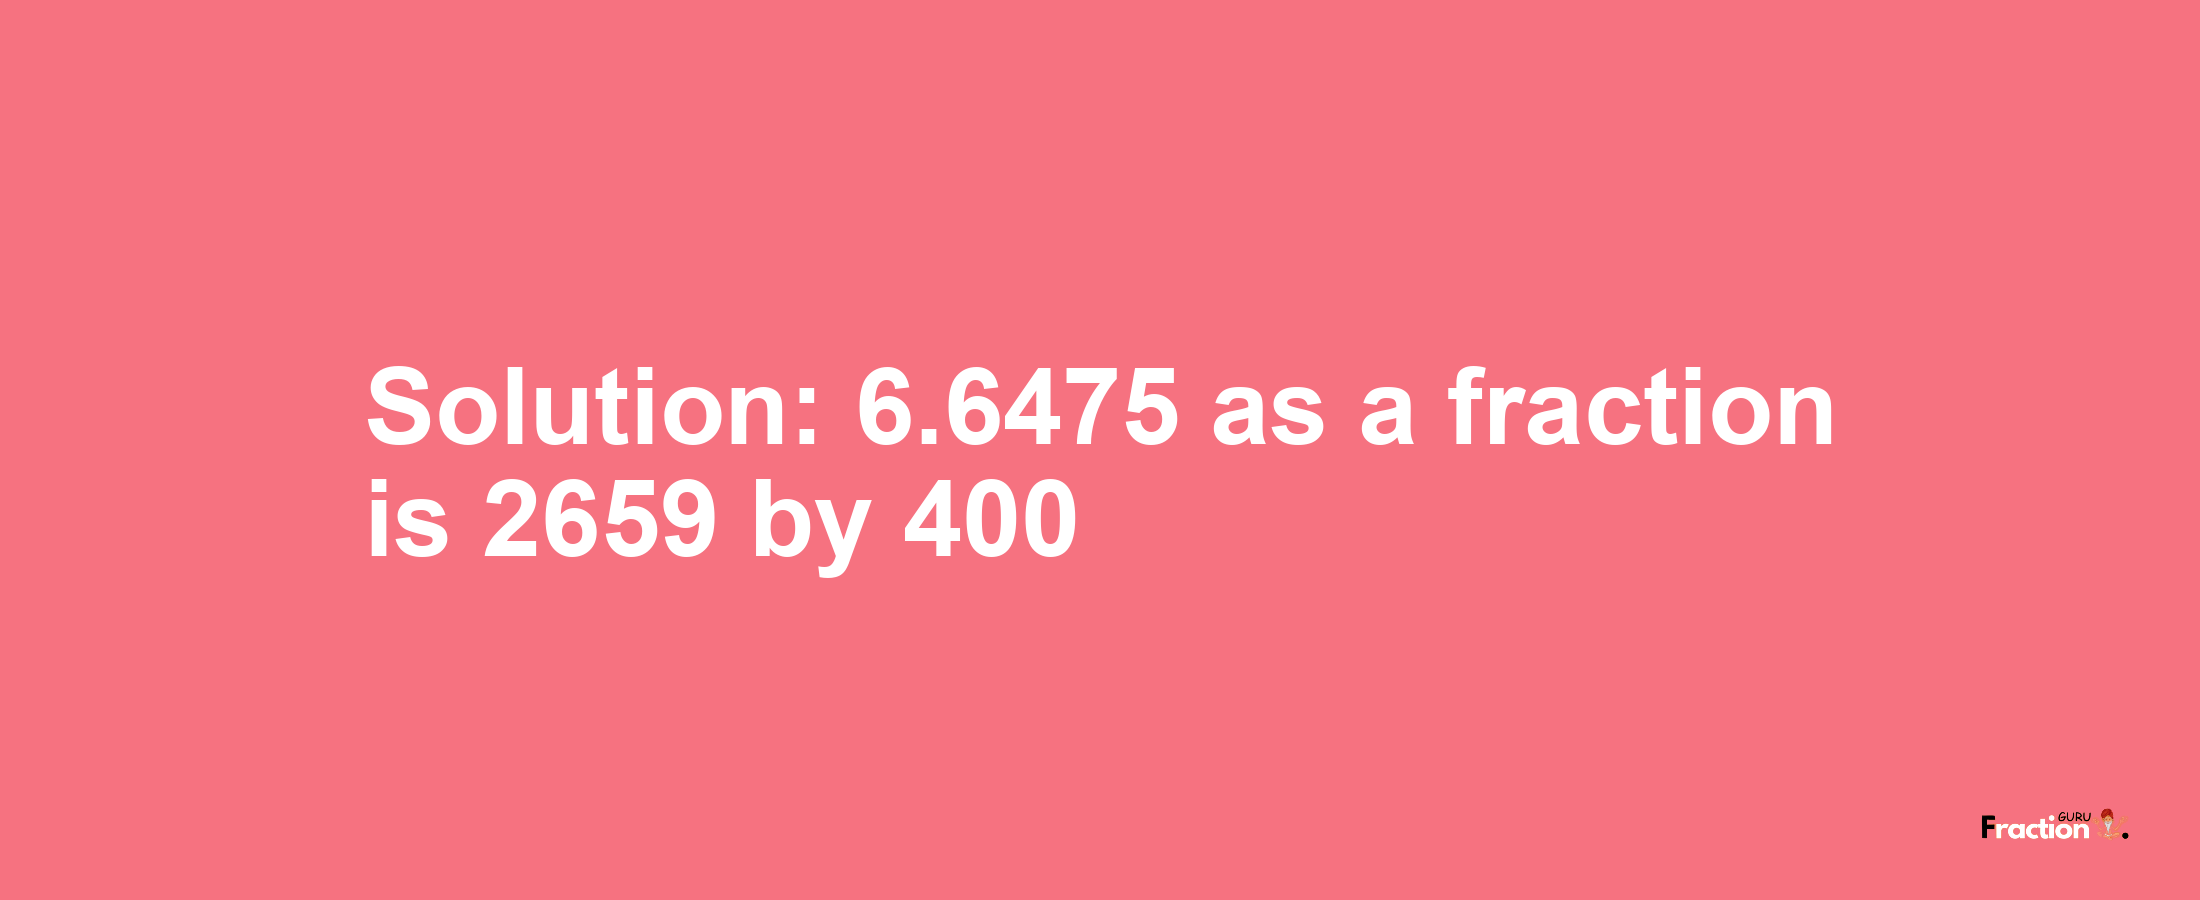 Solution:6.6475 as a fraction is 2659/400